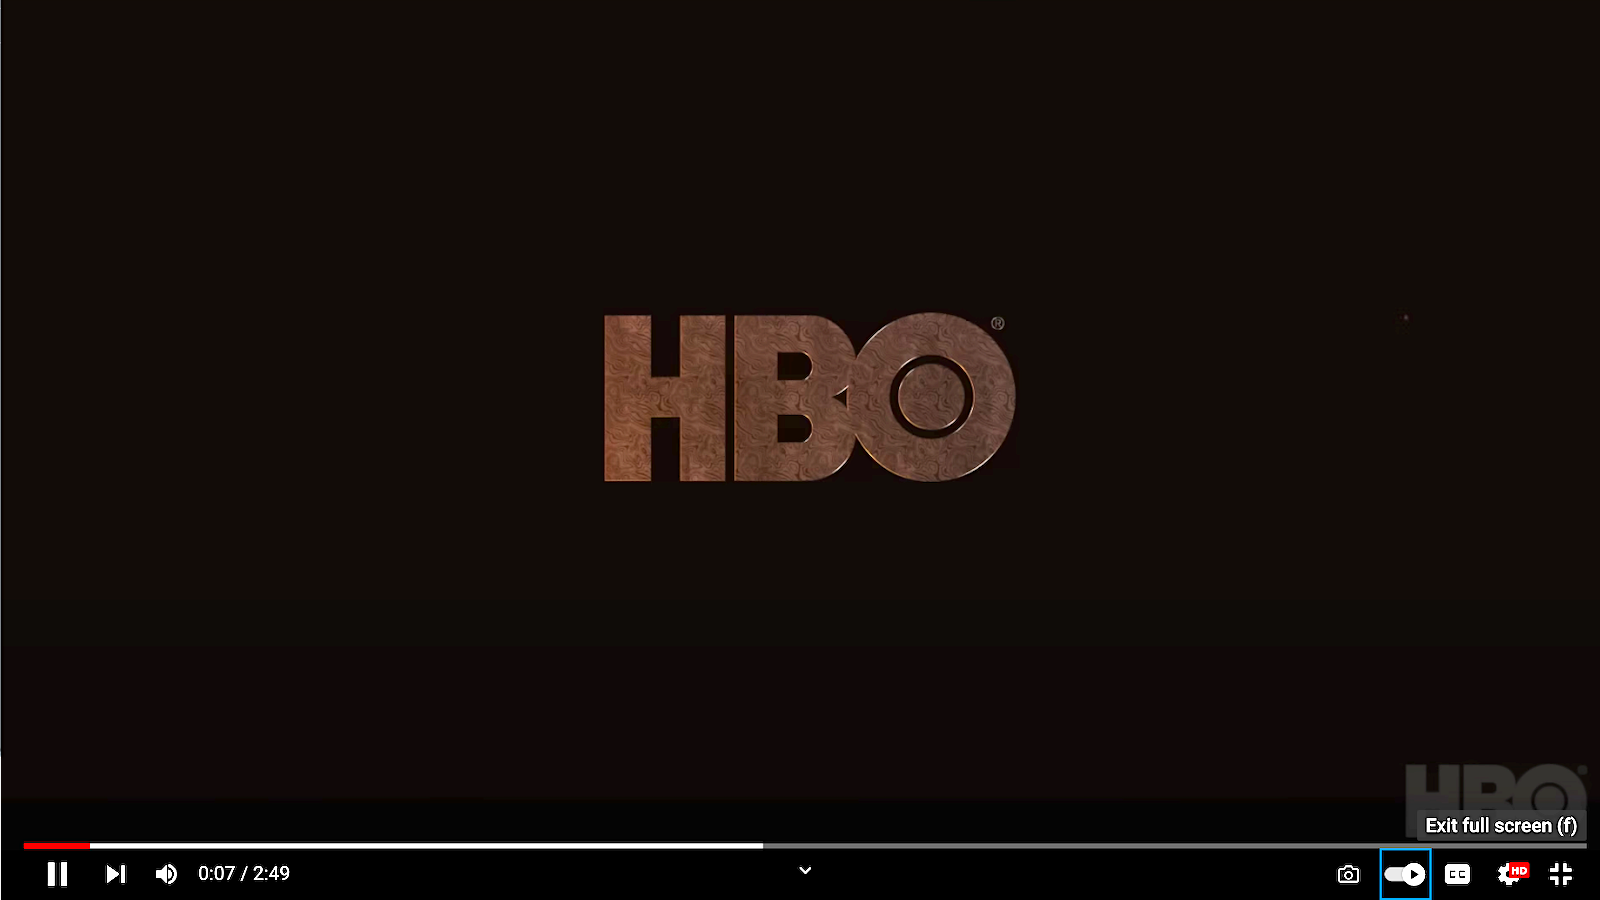 A screenshot of the HBO logo that precedes House of the Dragon on YouTube